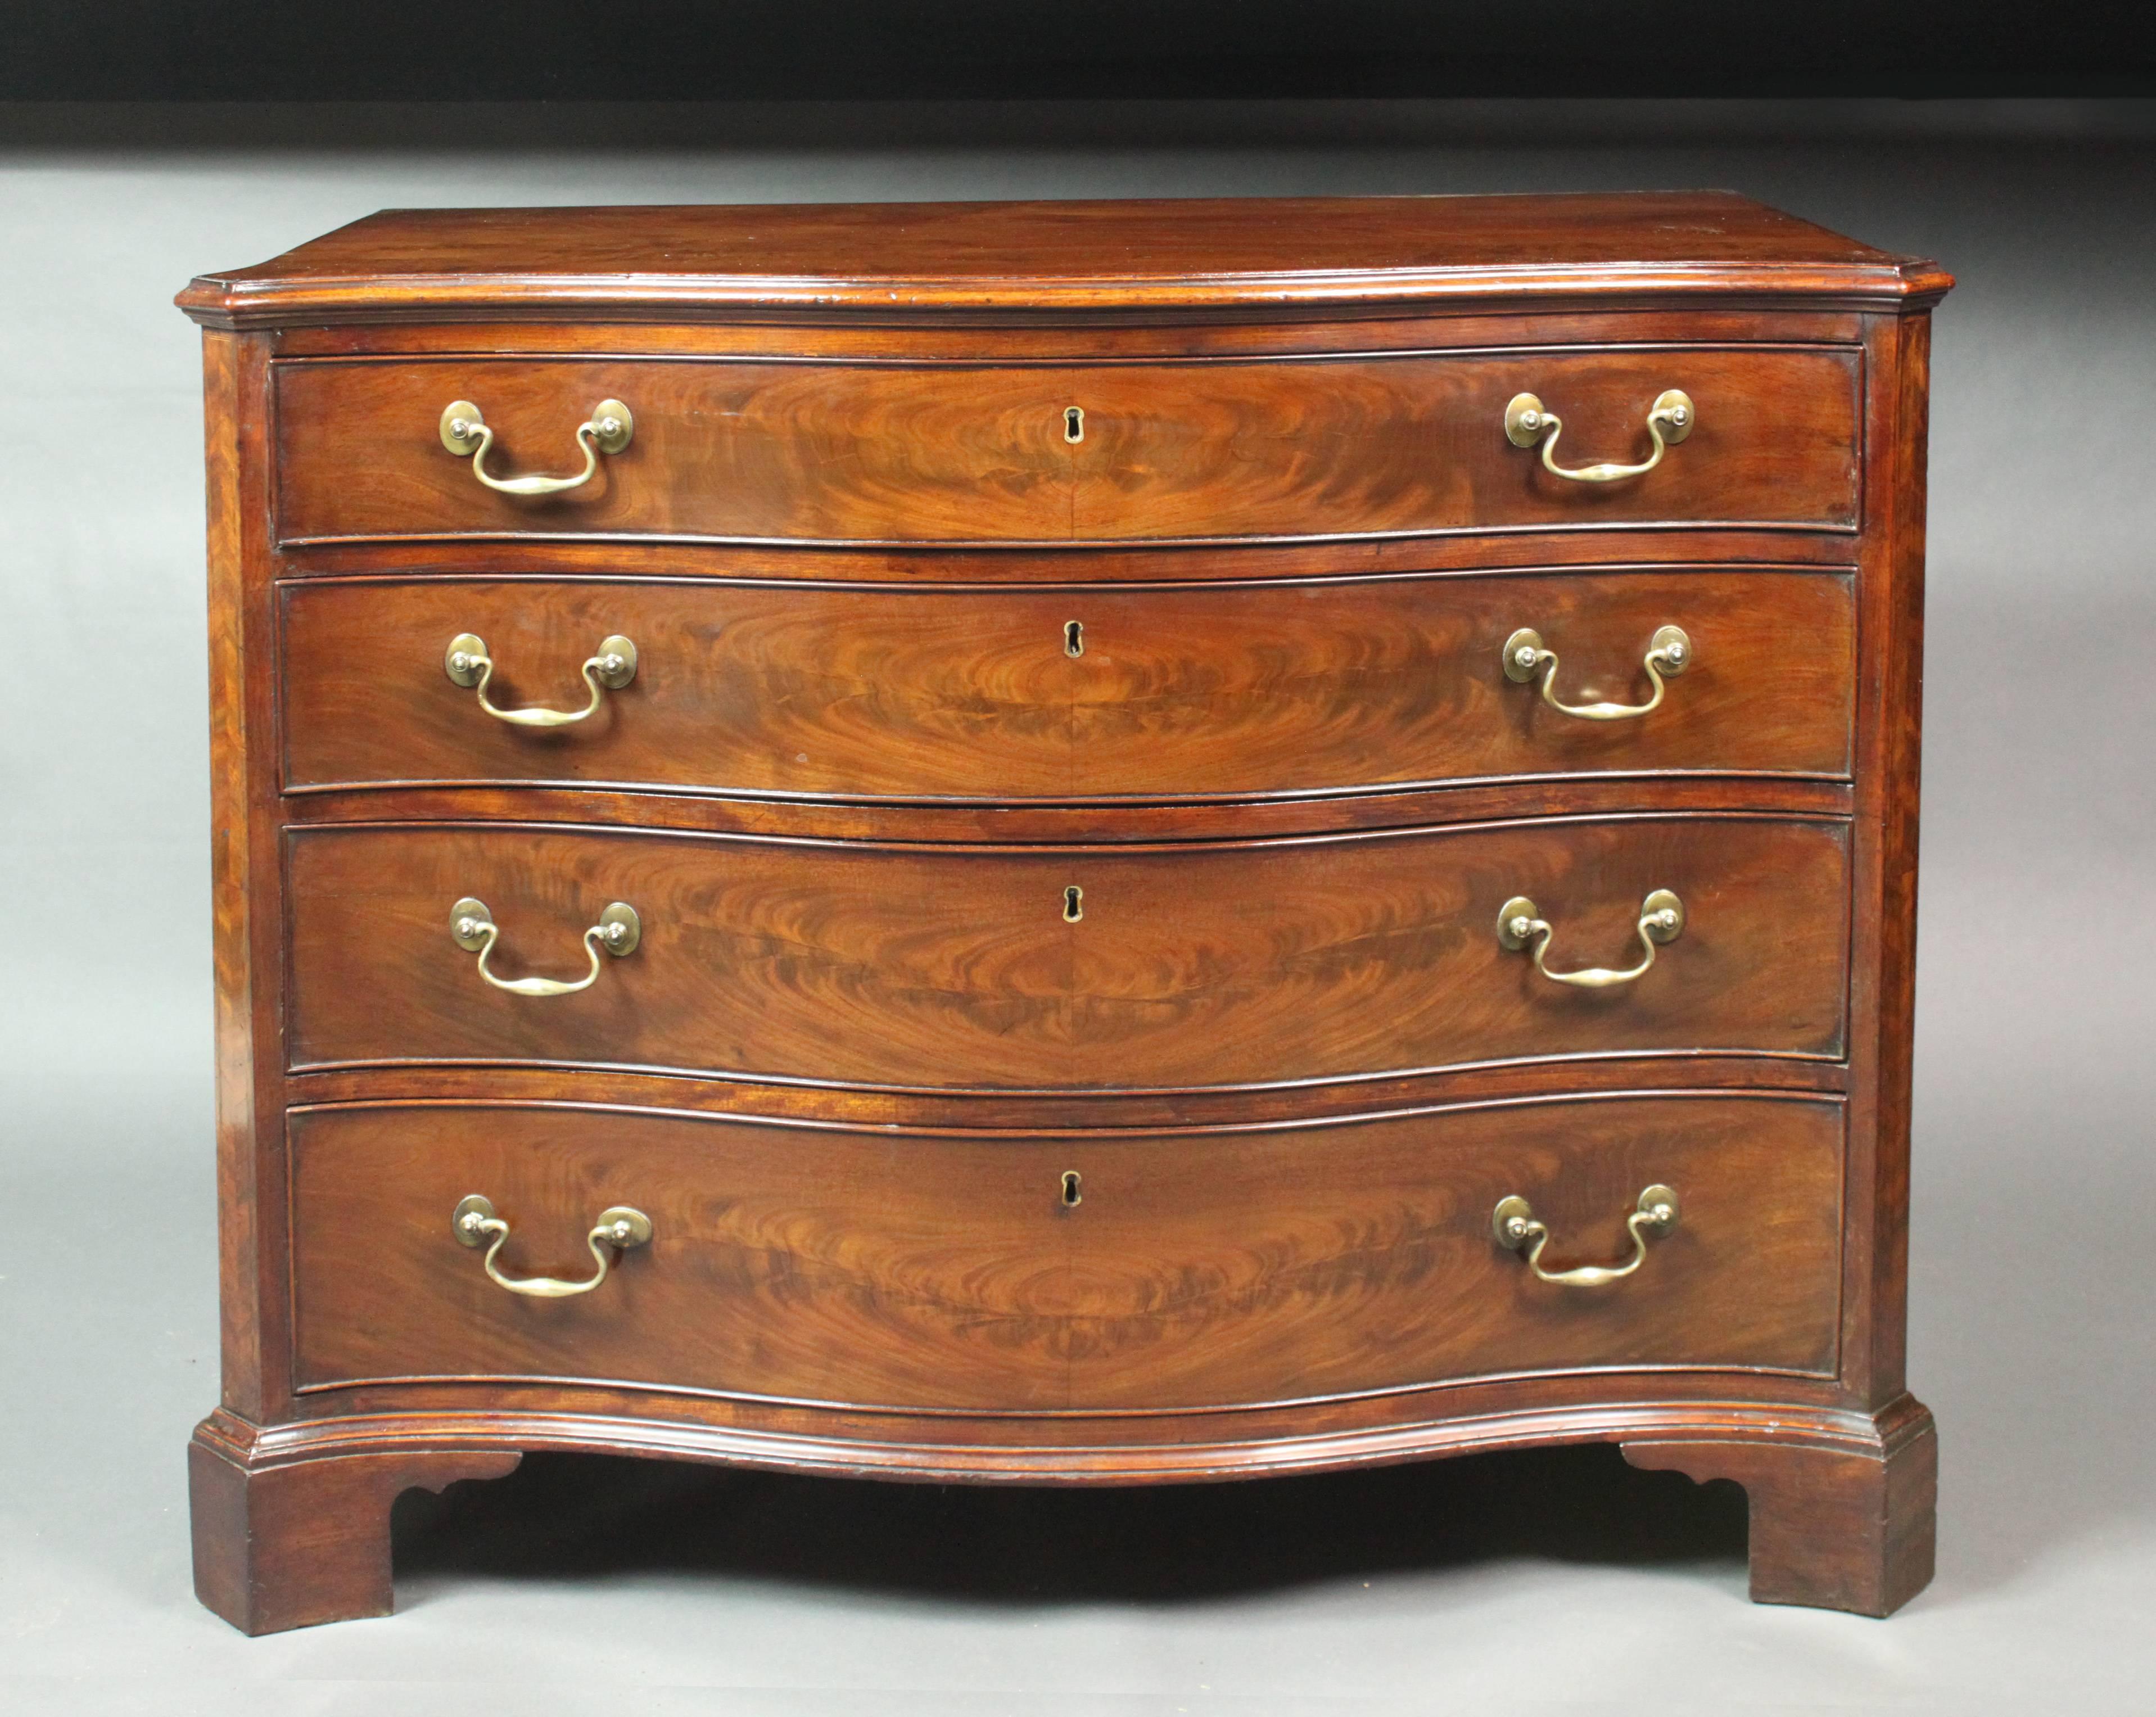 Antique Mahogany Serpentine Chest For Sale At 1stdibs